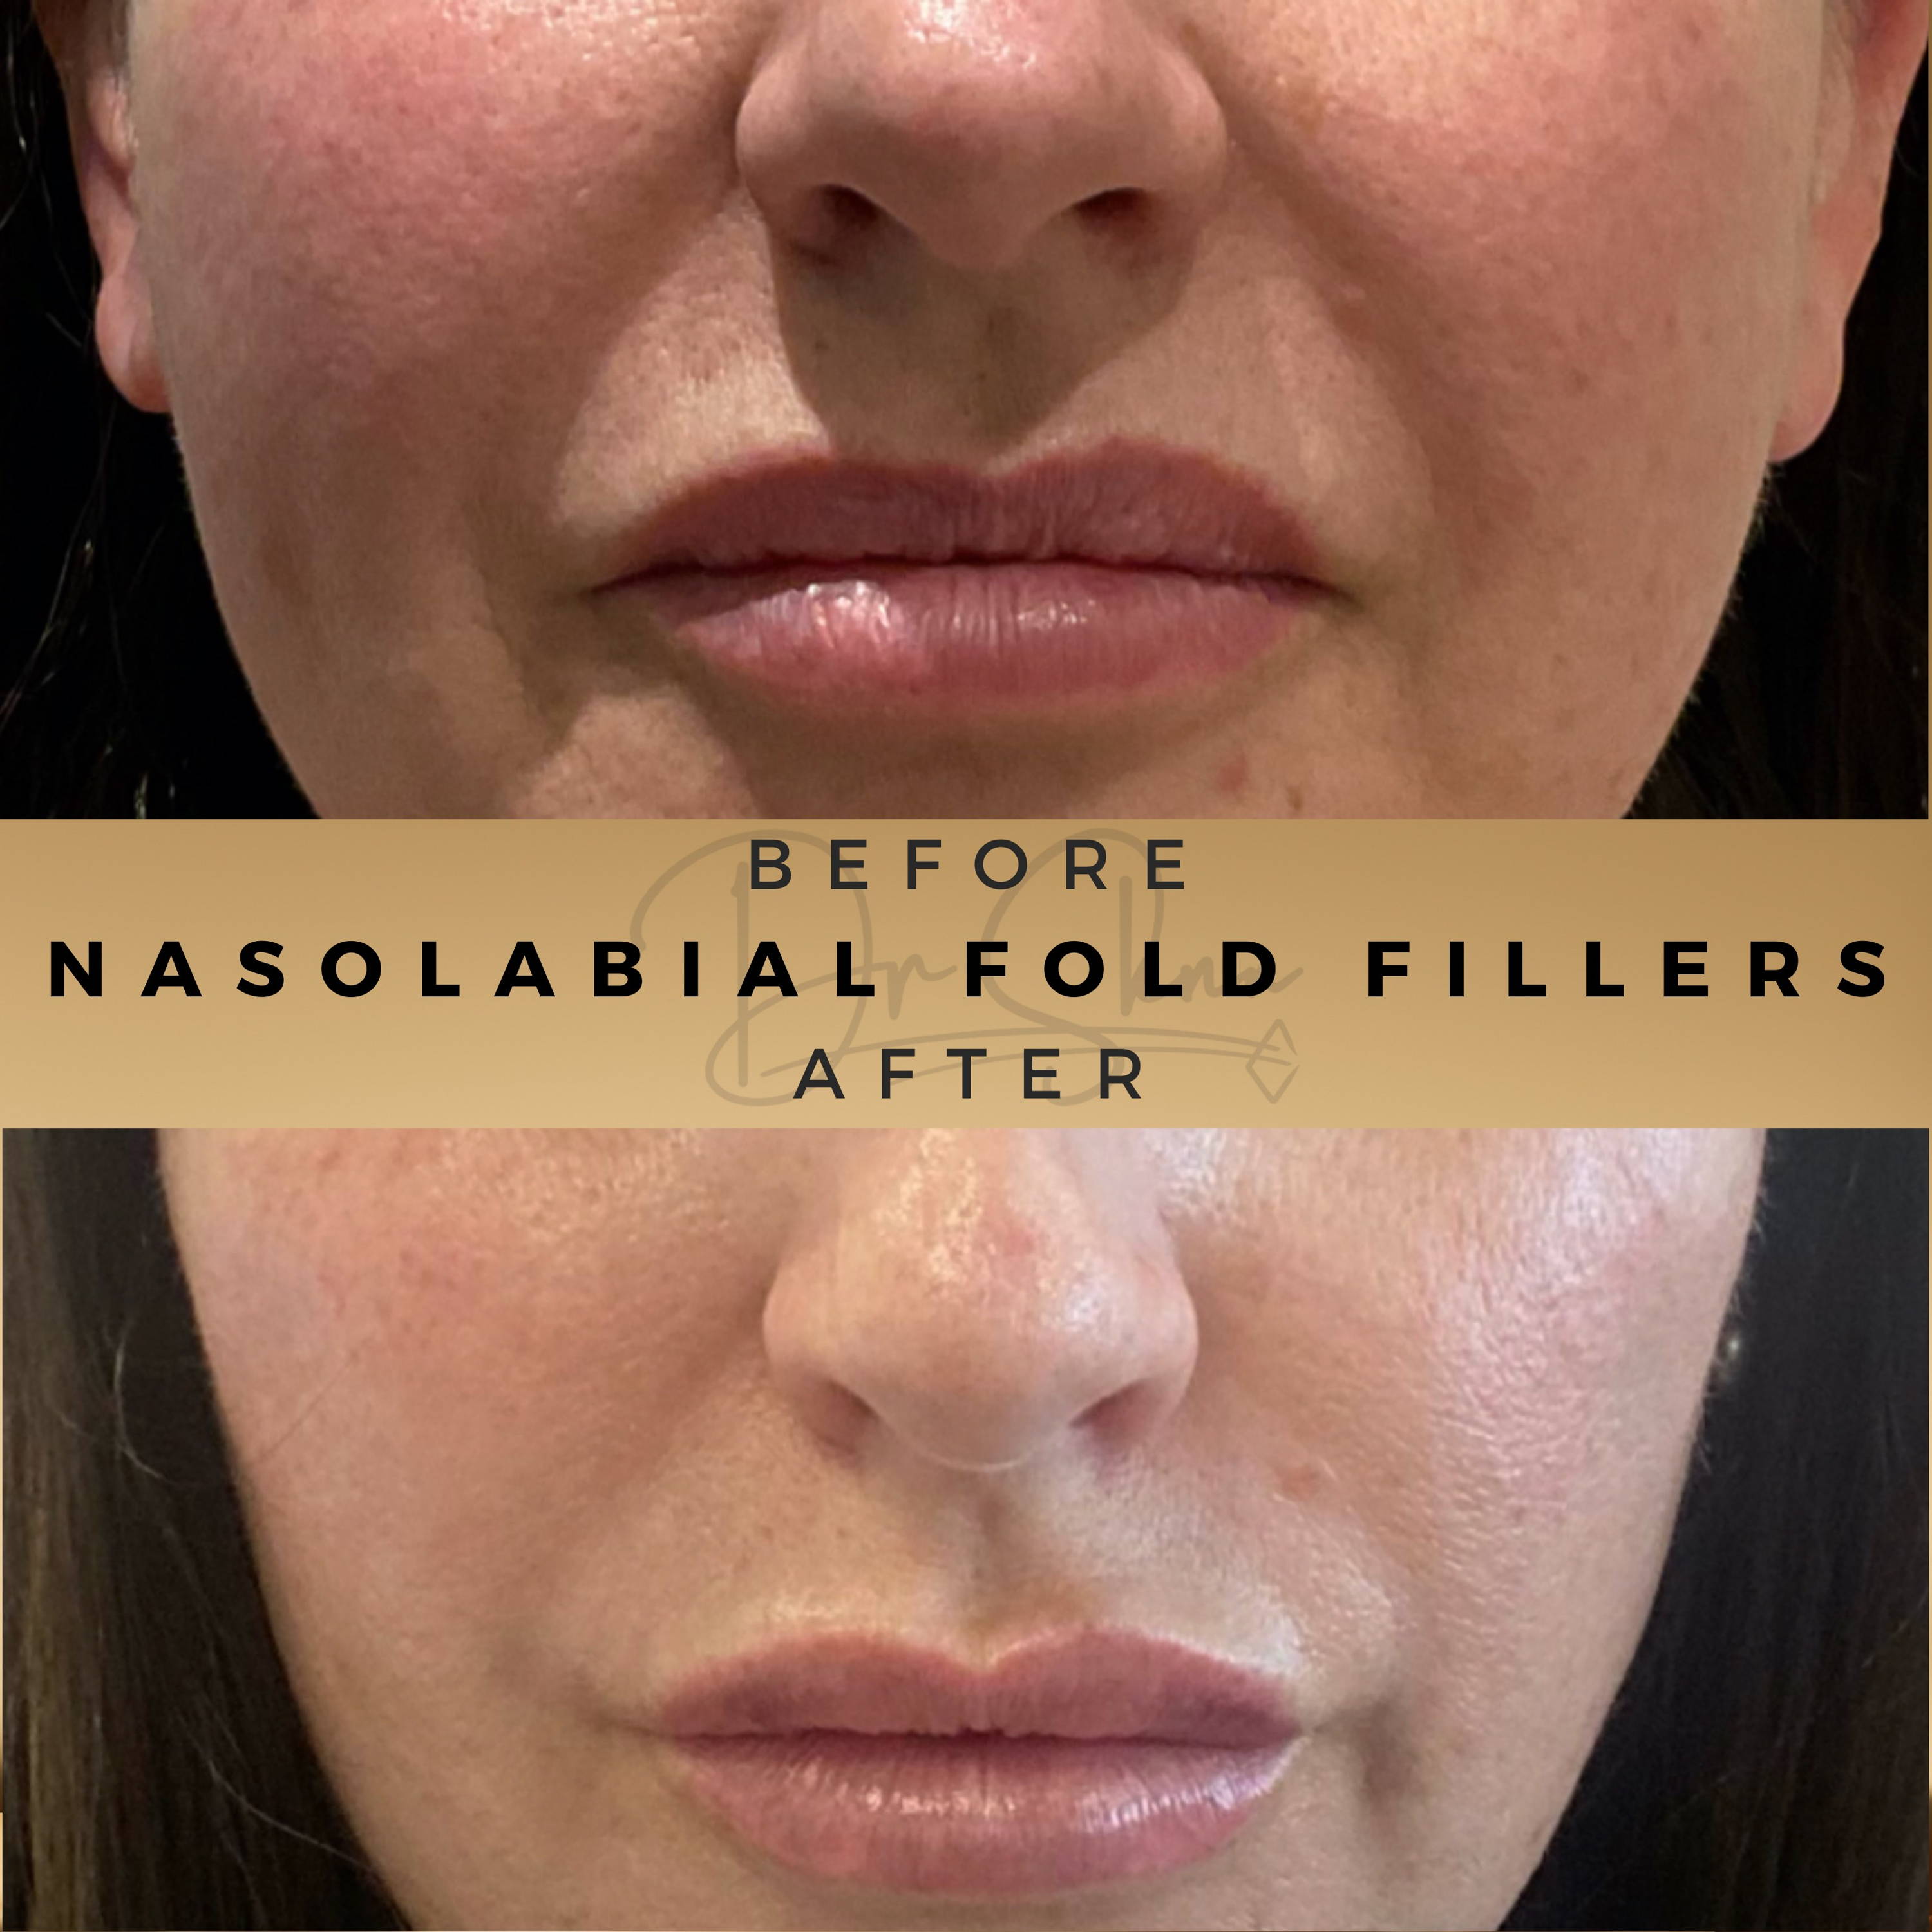 Nasolabial Fold Fillers Wilmslow Before & After Dr Sknn Wilmslow Before & After Dr Sknn